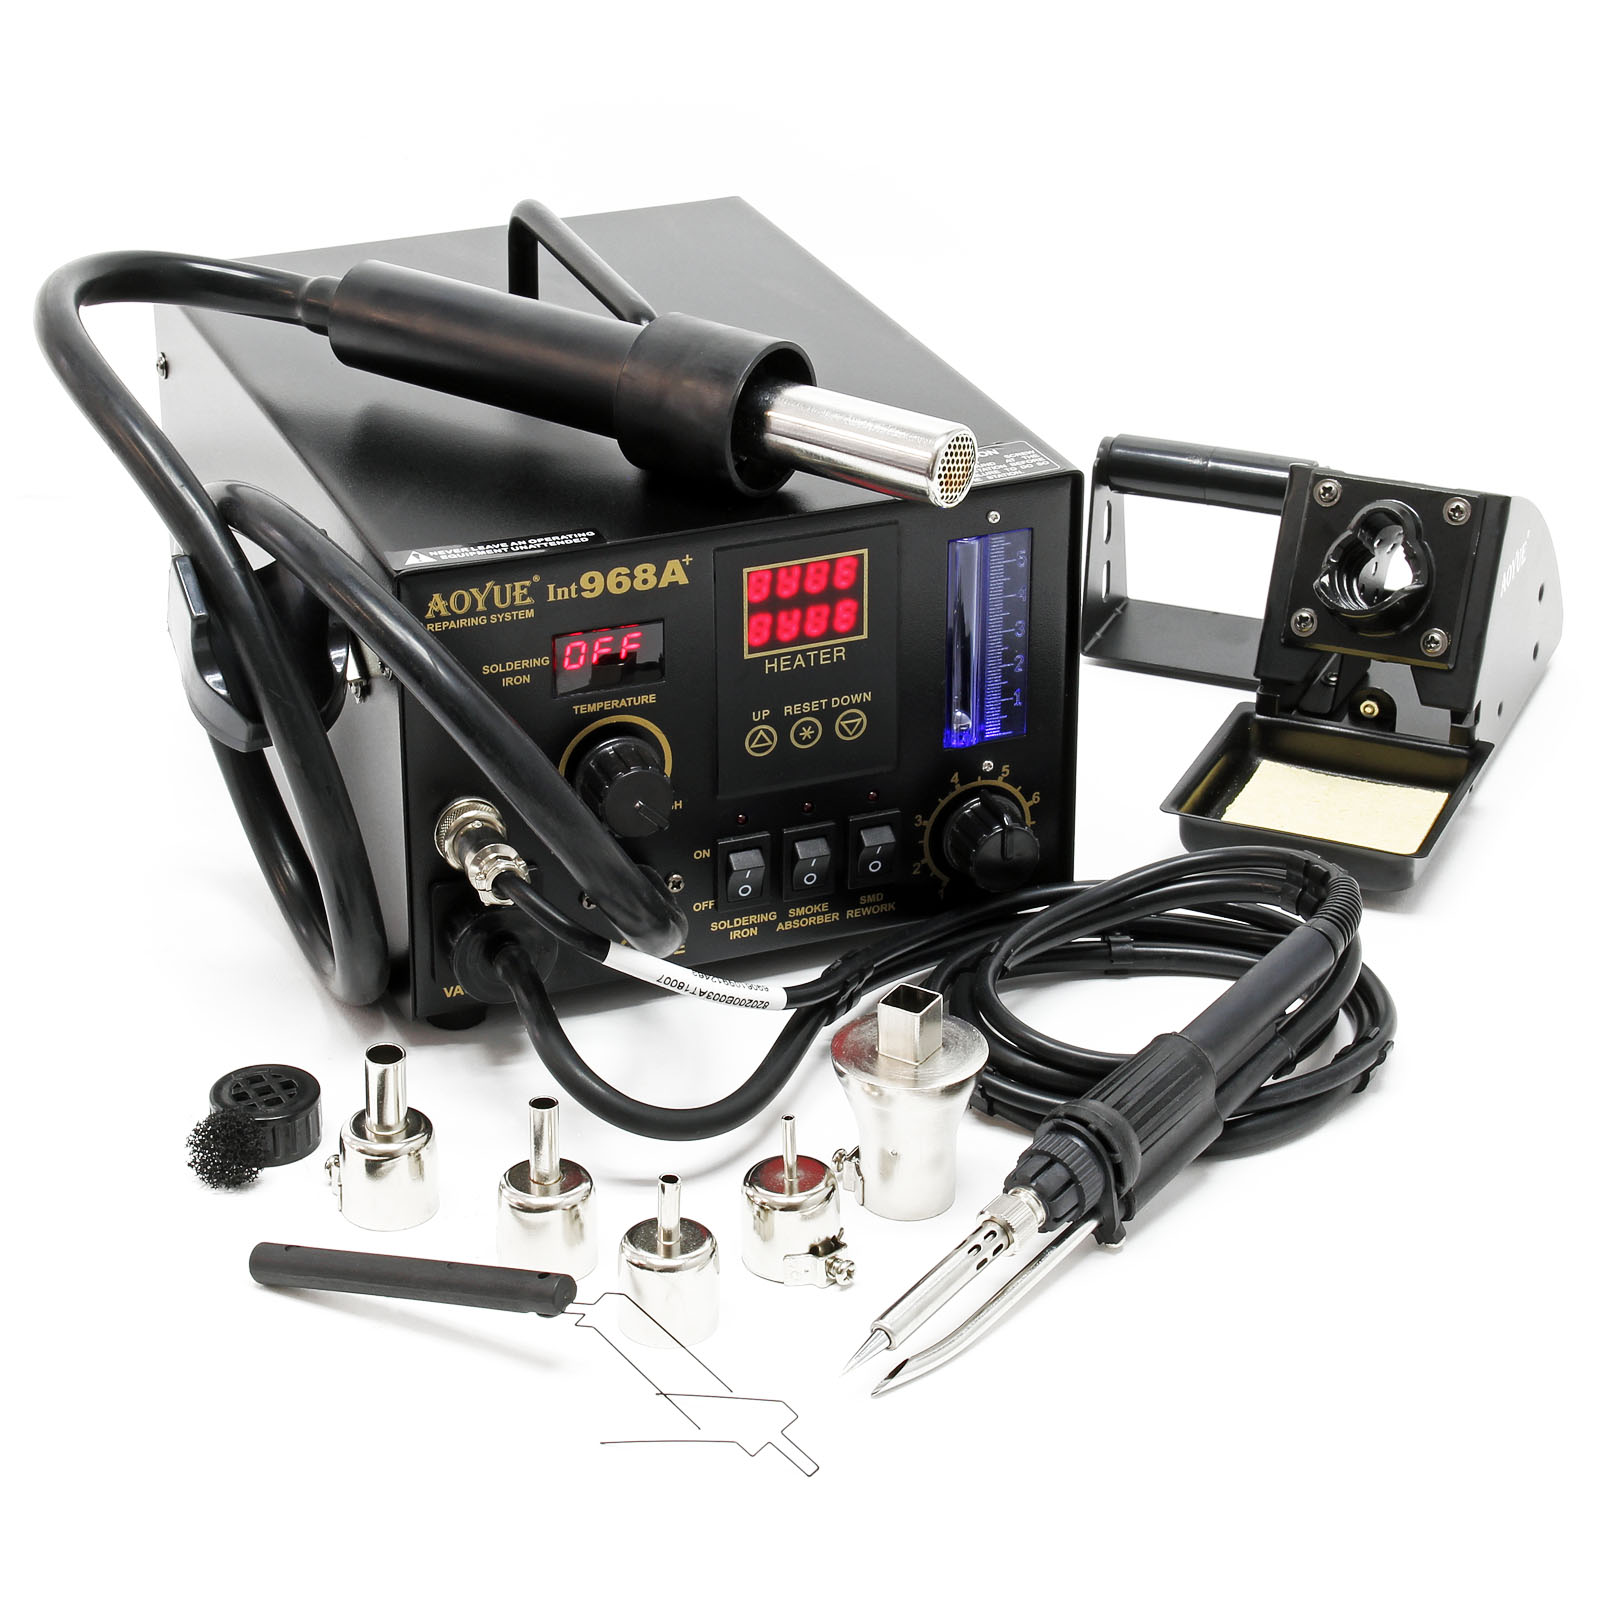 AOYUE Int968A+ RepairingStation Hot Air Soldering Station 3in1